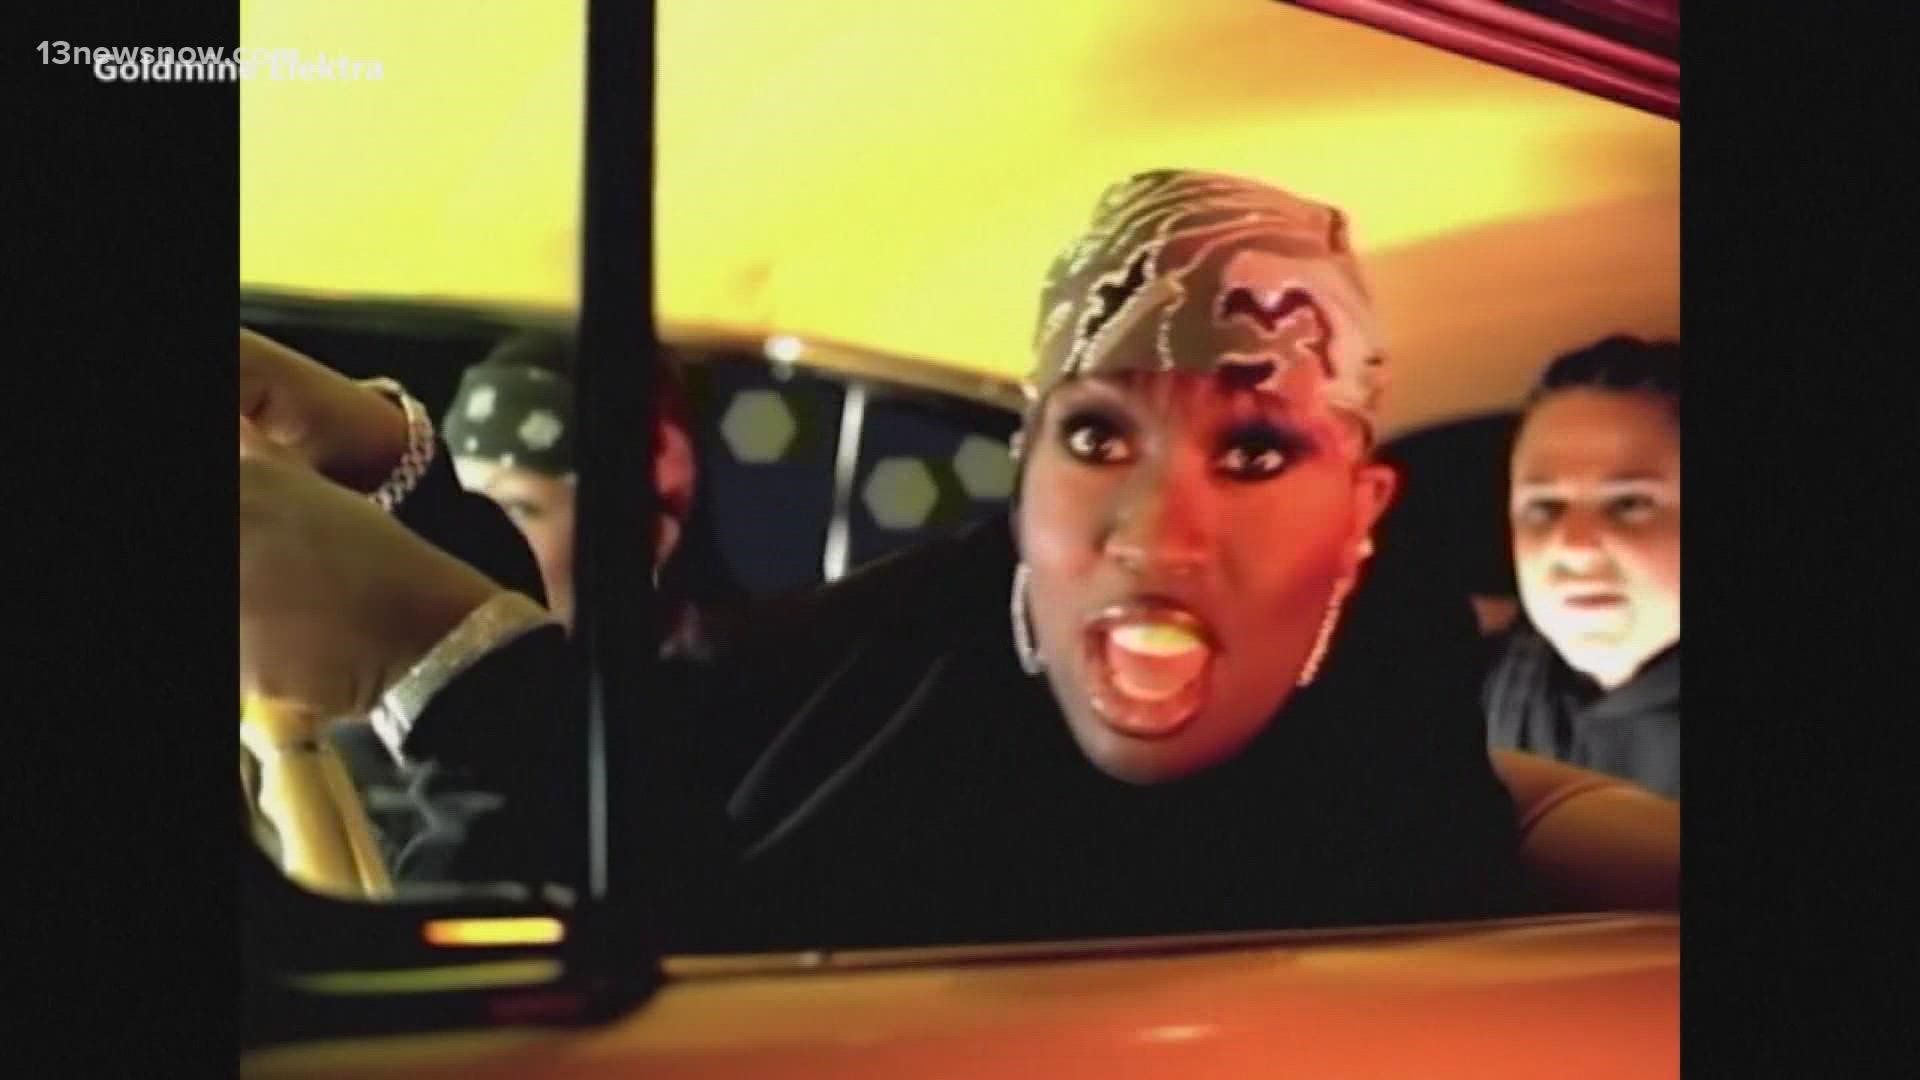 McLean Street will become "Missy Elliott Boulevard" in honor of the music legend.